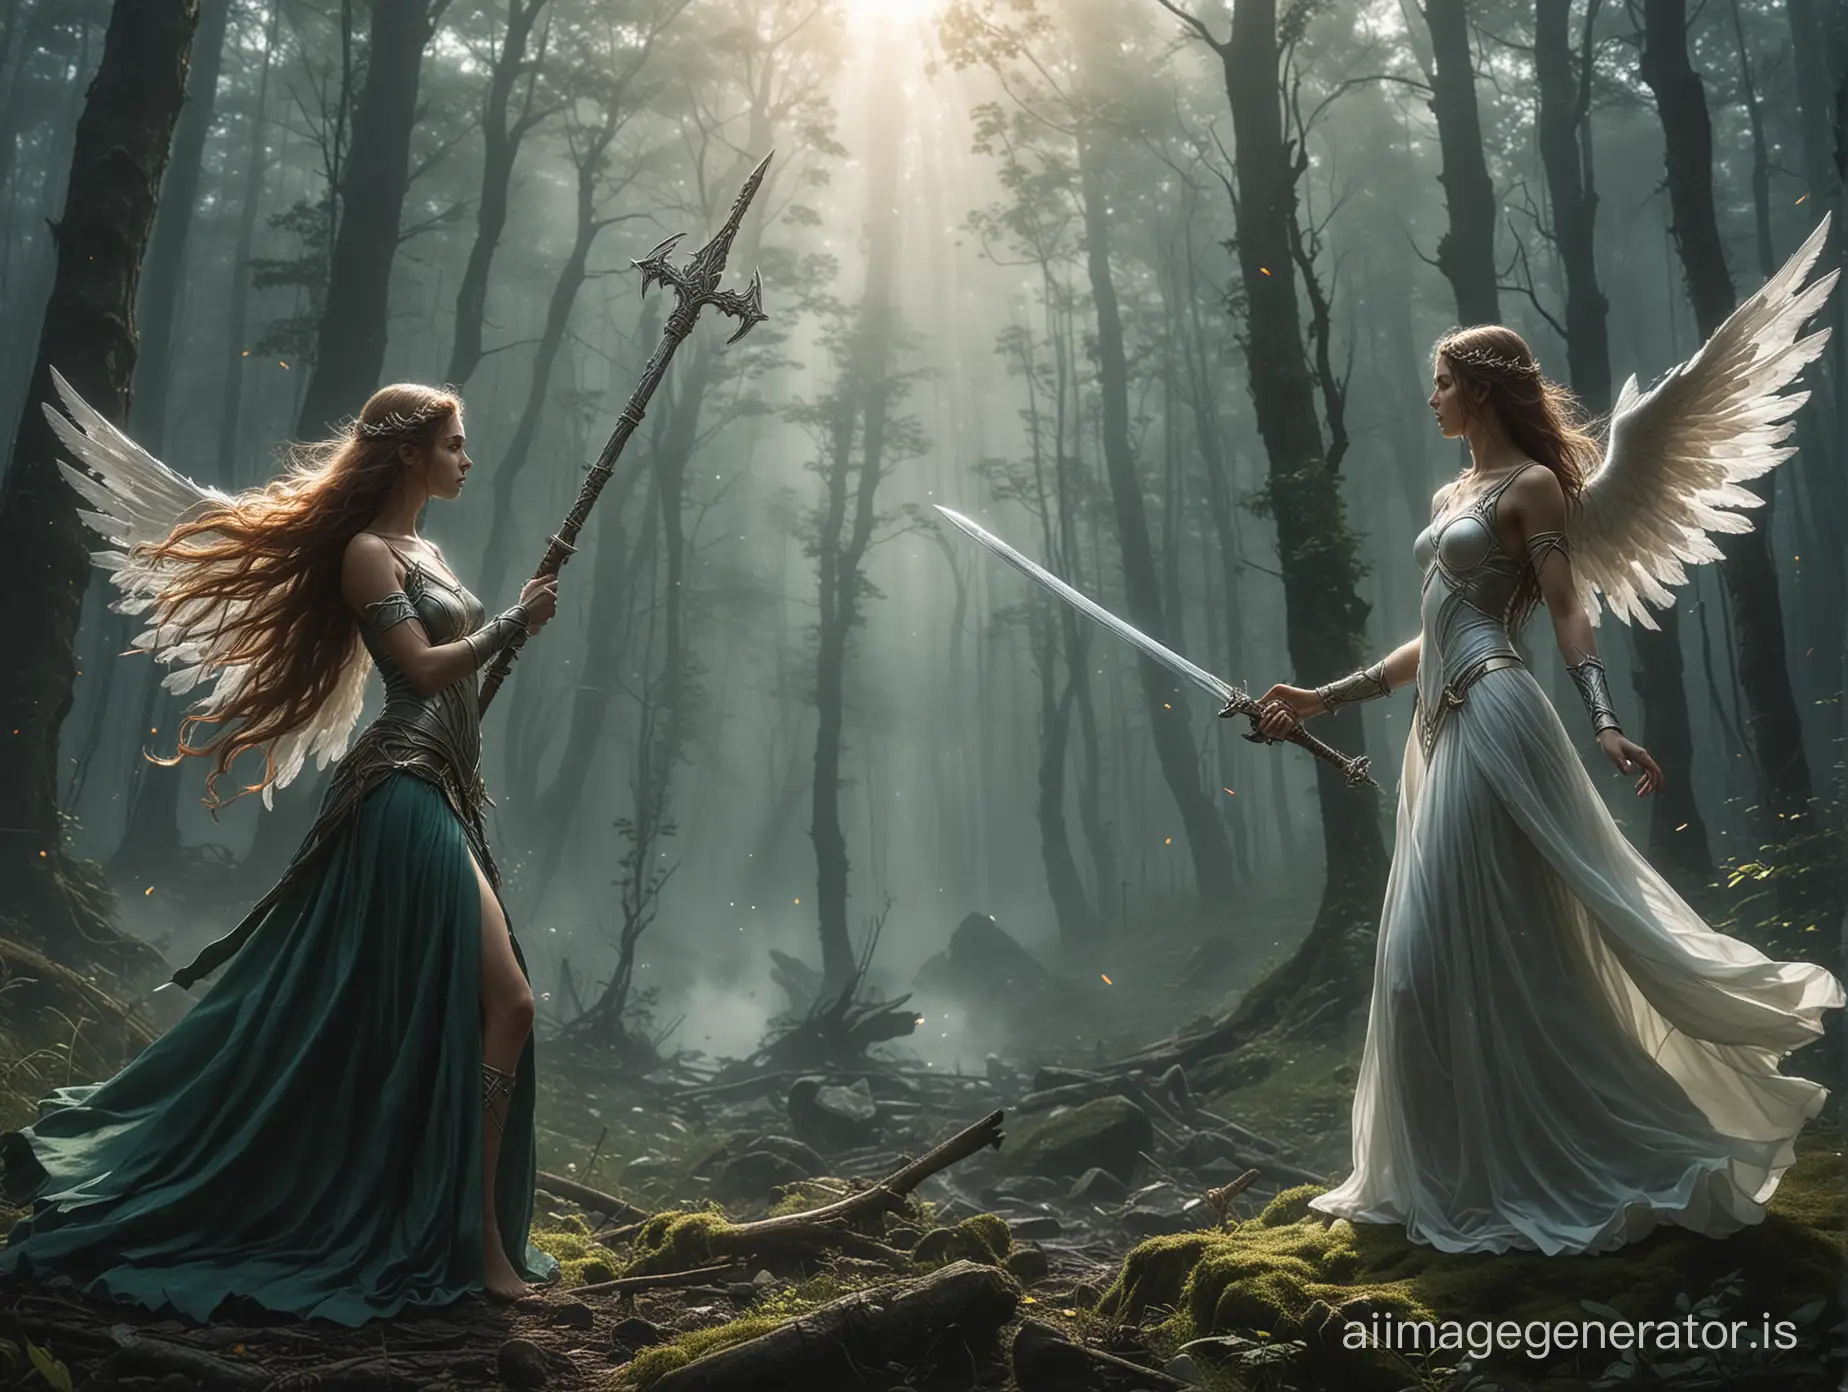 New task, on the background of a mountain, make a battle between a forest nymph woman and an angel woman. The forest nymph woman to hold a forest scepter, and the angel woman a sword. The moment I want to capture is when the sword and the scepter clash, and sparks start flying from them.